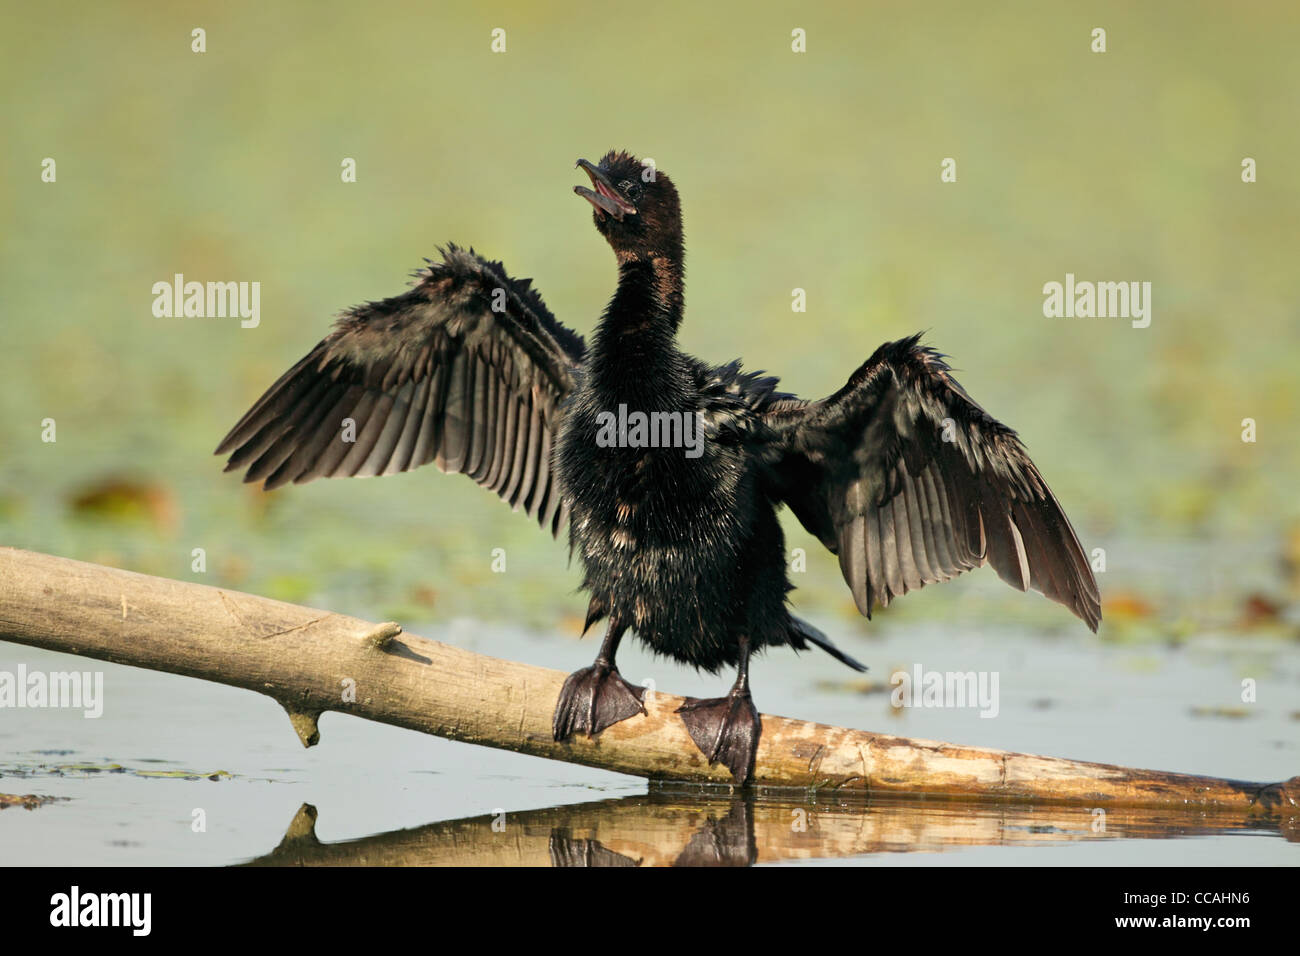 Pygmy cormorant (Phalacrocorax pygmeus) perched on small branch with reeds behind. Front view with wings outstretched Stock Photo